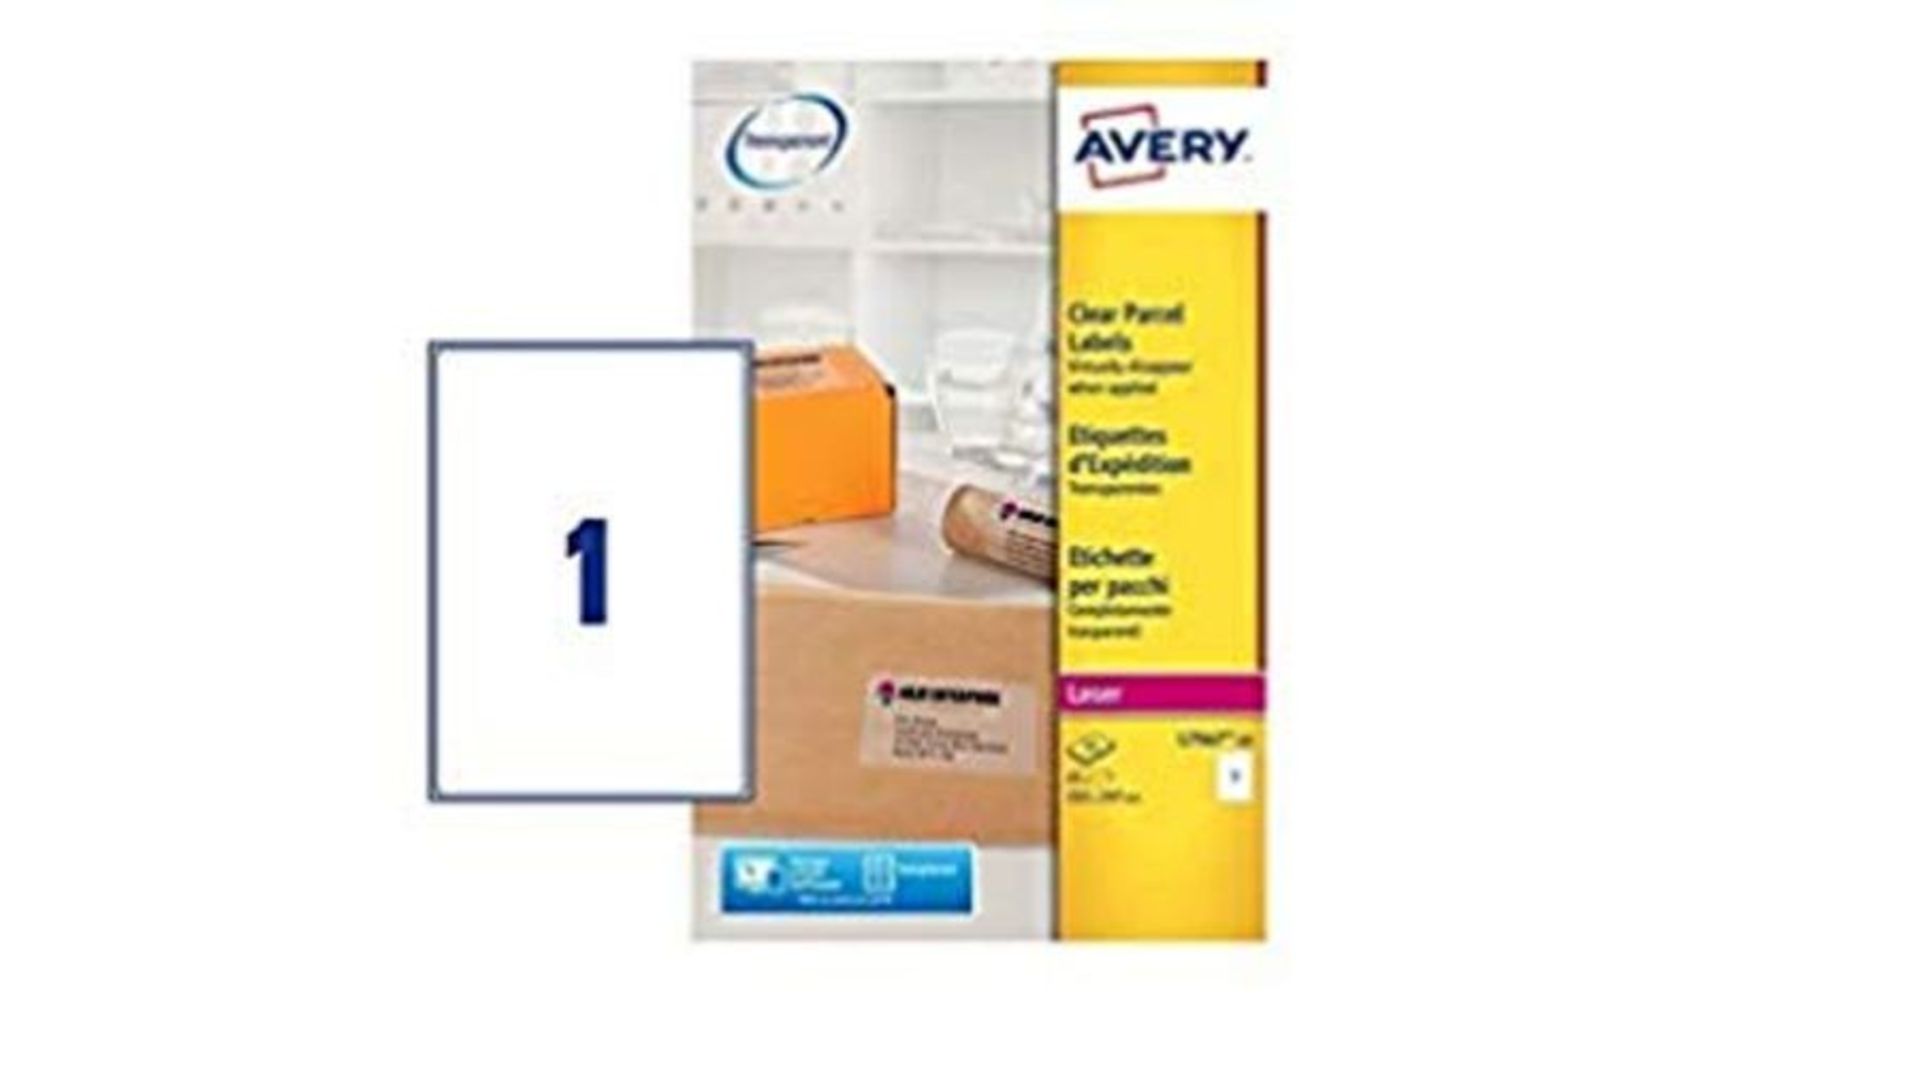 Avery Self Adhesive Clear Parcel Shipping Labels, Laser Printers, 1 Label per A4 Sheet